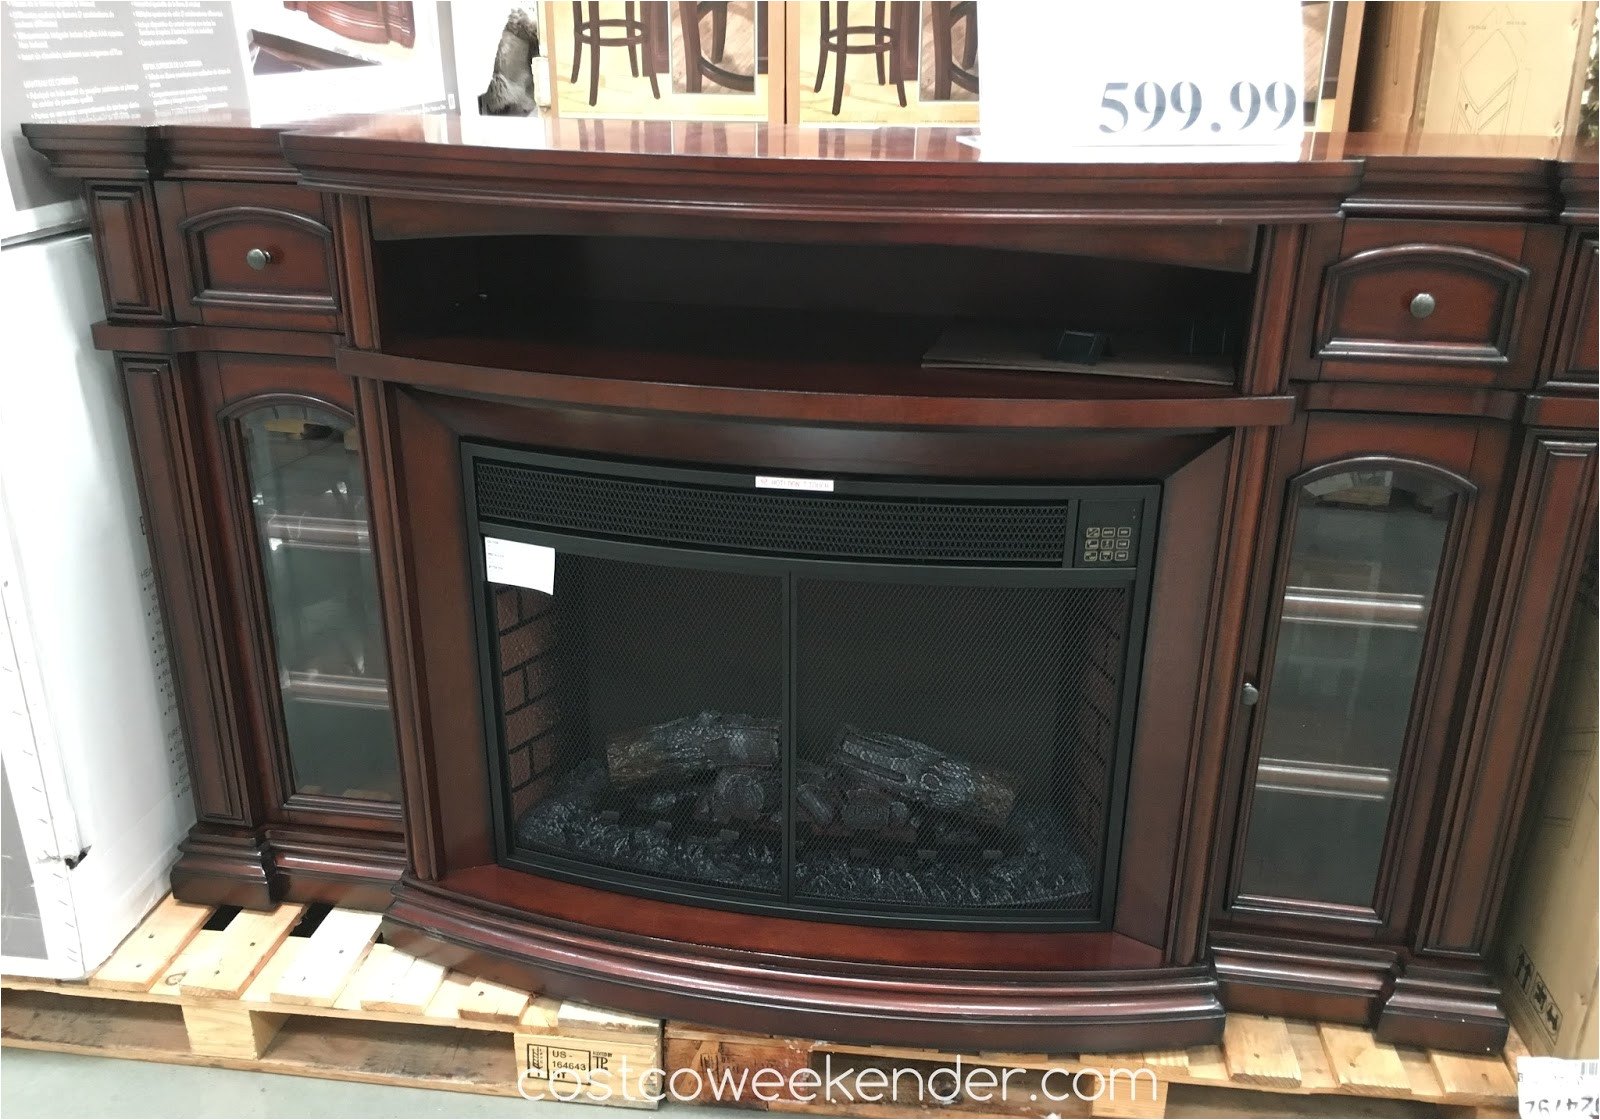 Ember Hearth Electric Fireplace Costco Reviews | AdinaPorter